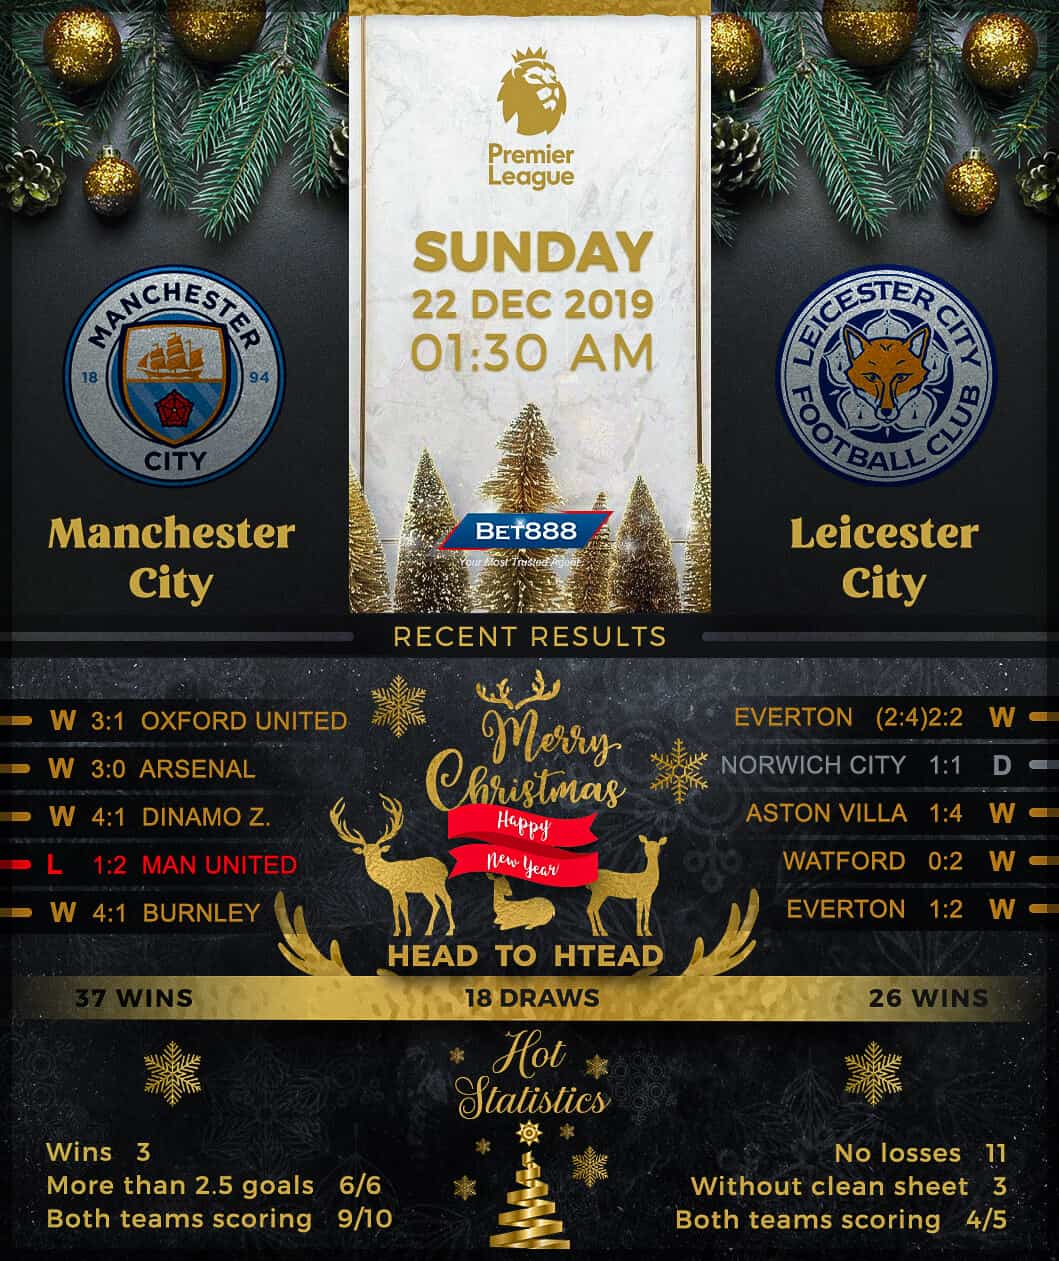 Manchester City vs Leicester City 22/12/19